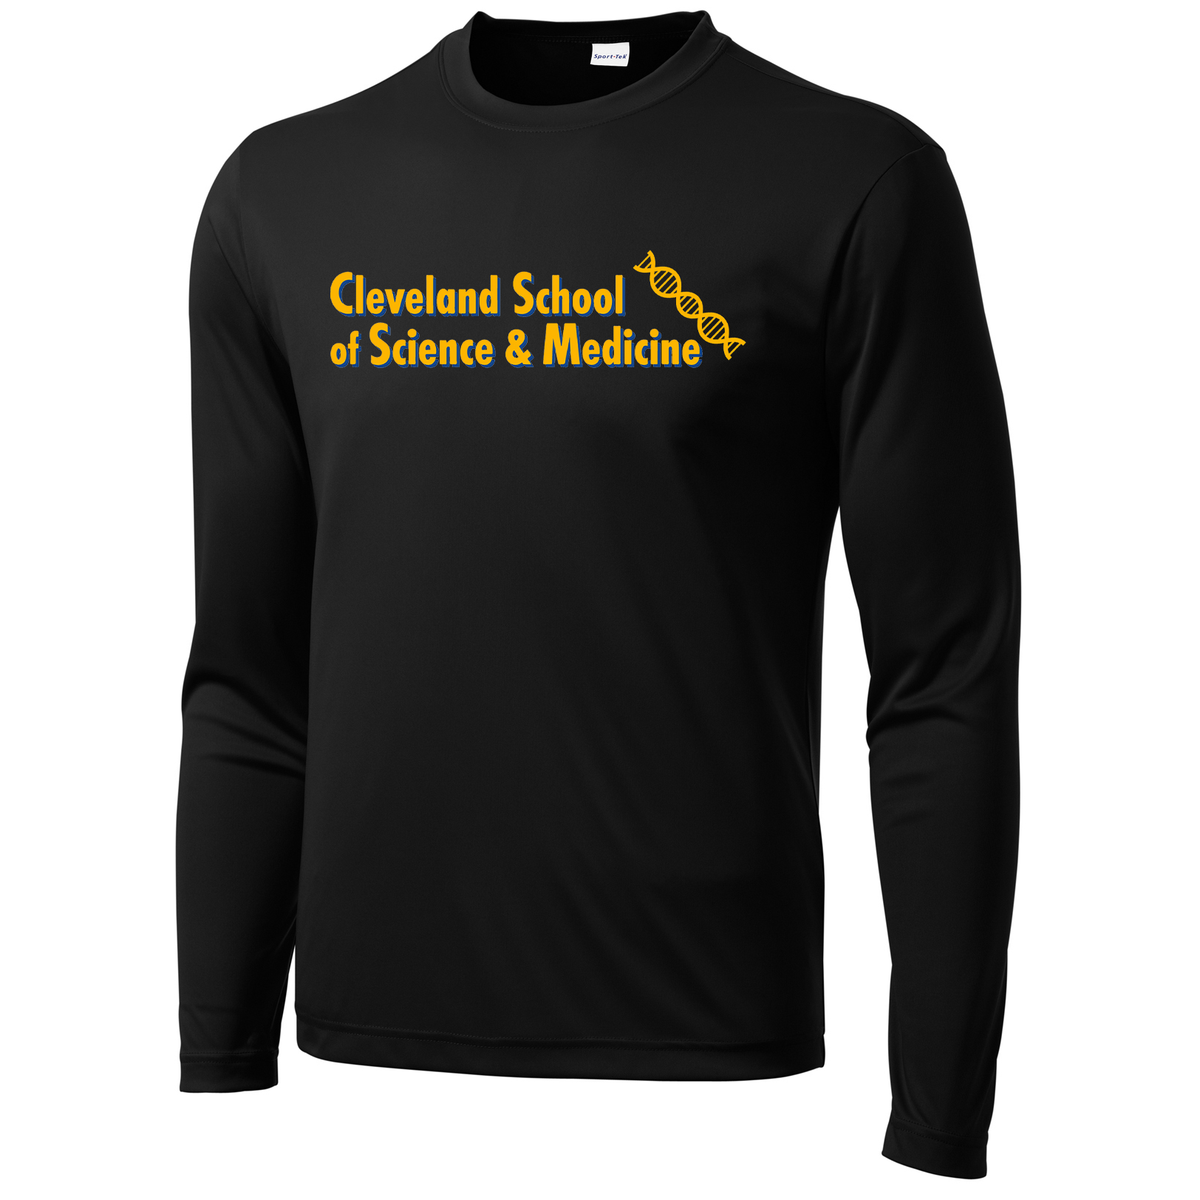 Cleveland School of Science and Medicine Long Sleeve Performance Shirt